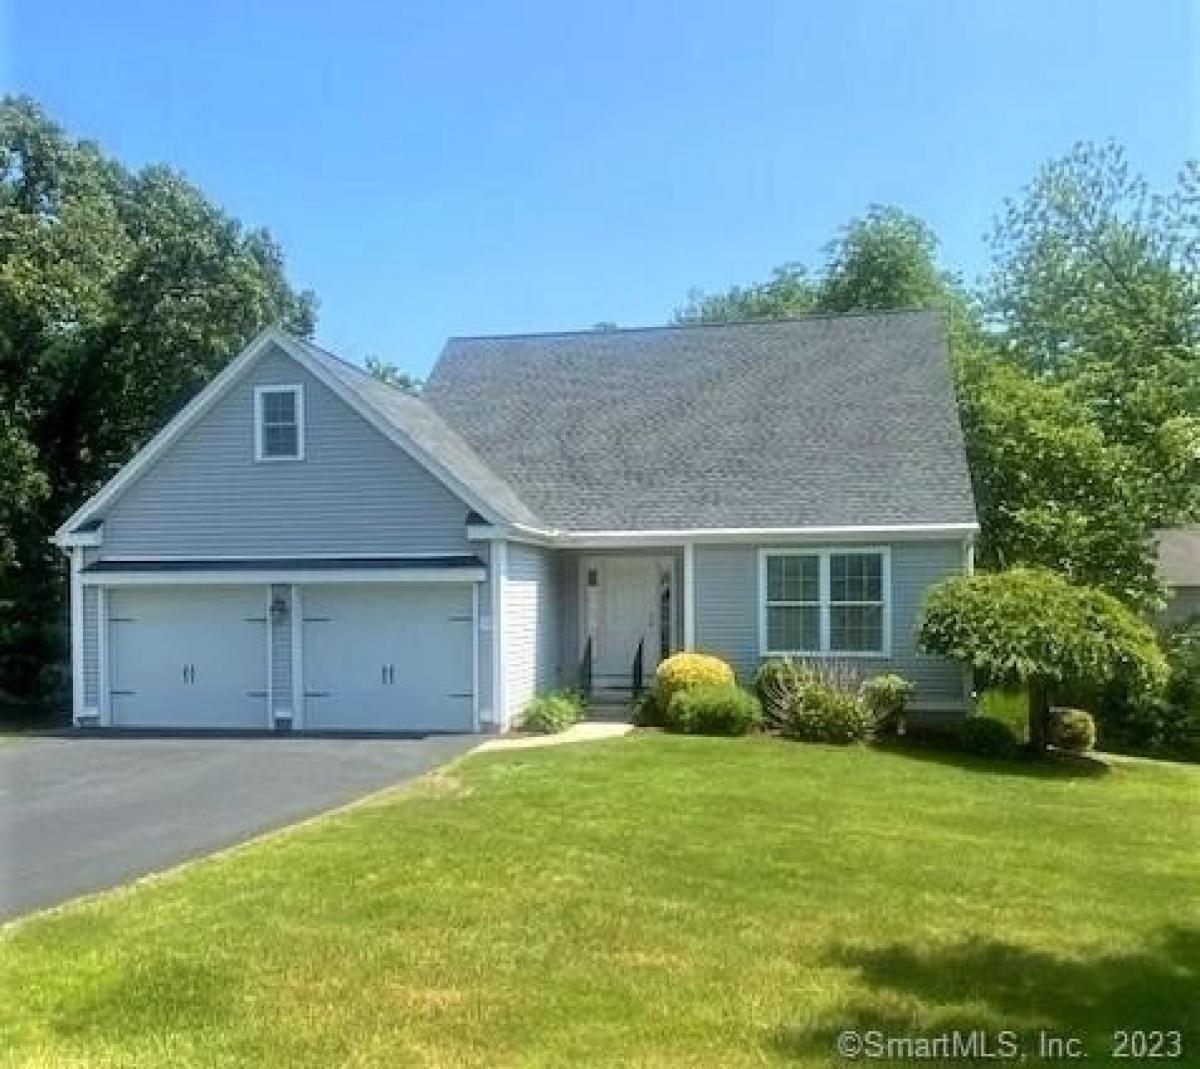 Picture of Home For Sale in Plainville, Connecticut, United States